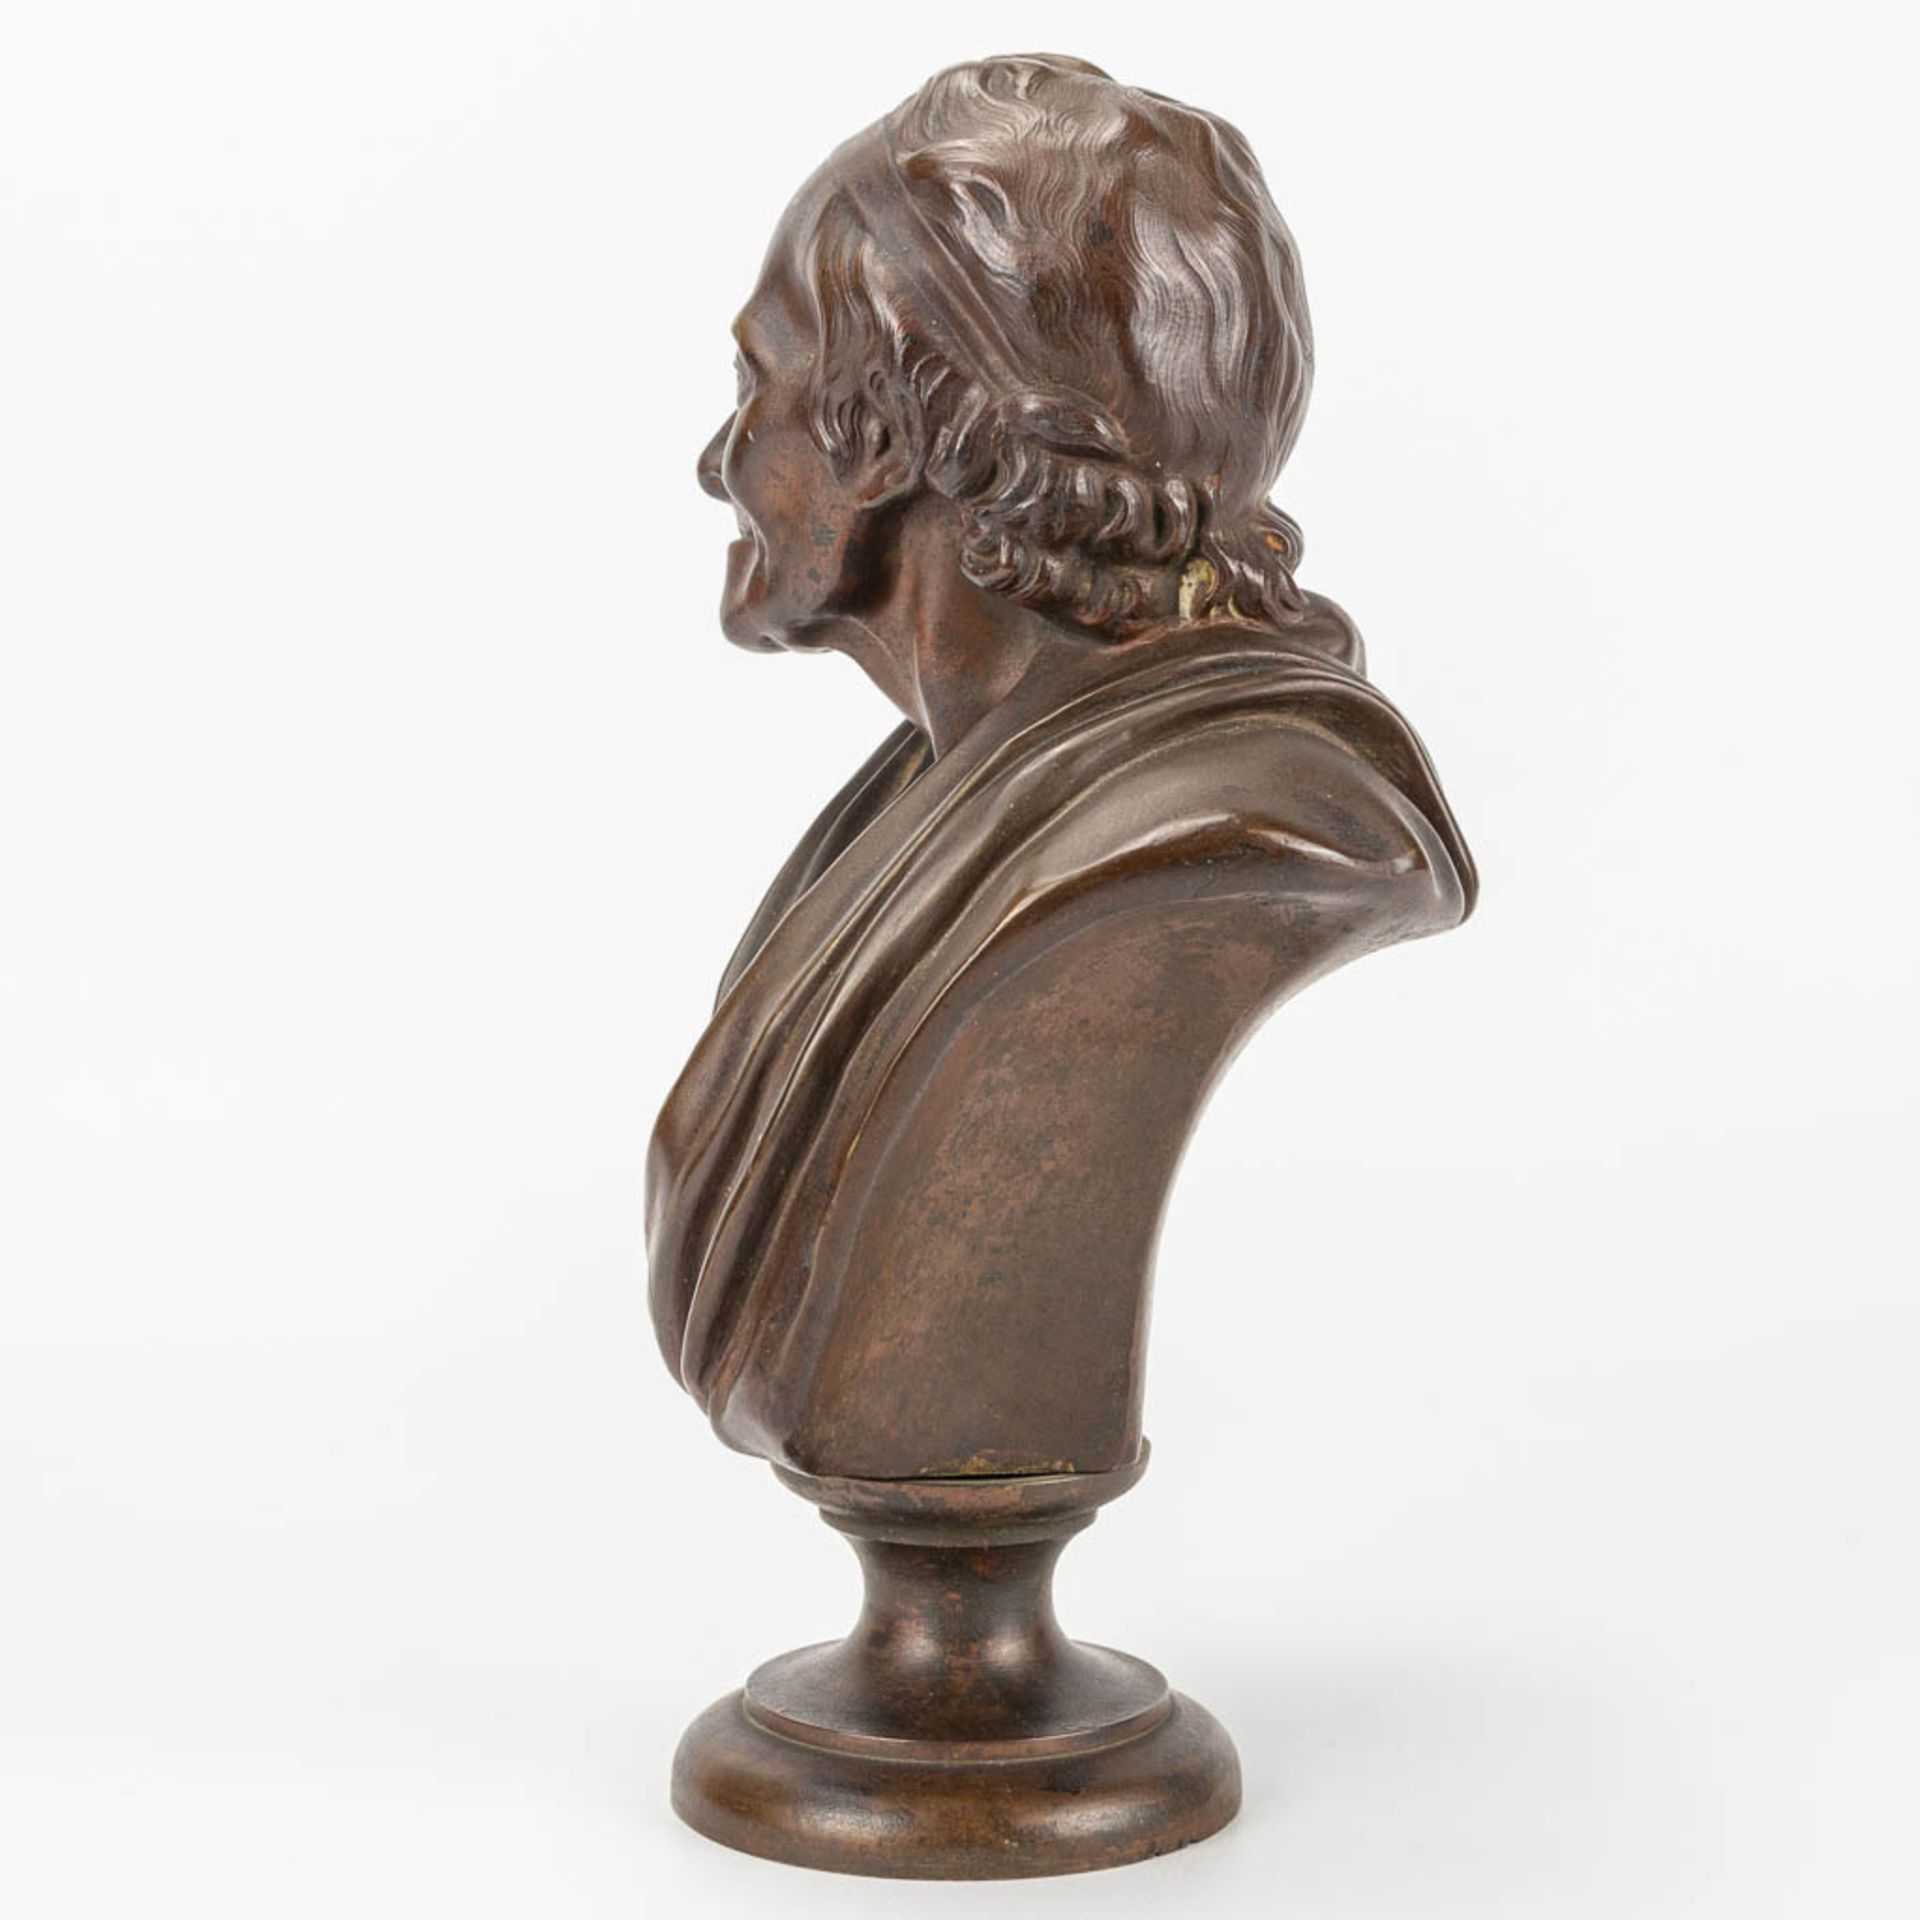 A bust of Voltaire made of bronze. 19th century. - Image 5 of 9